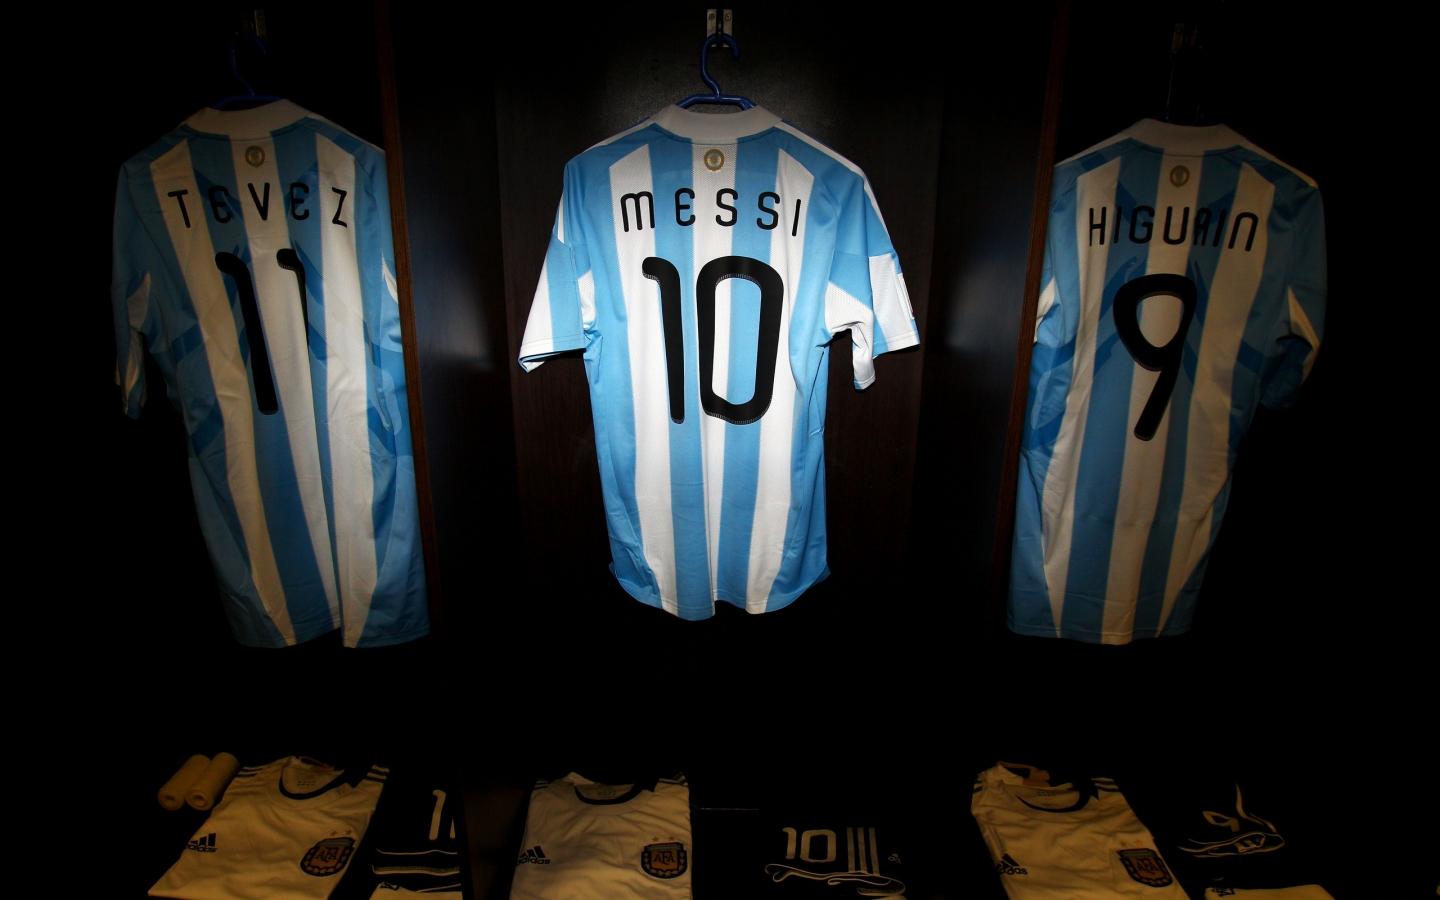 Tshirt of Messi, Tevez and Higuain for 1440 x 900 widescreen resolution